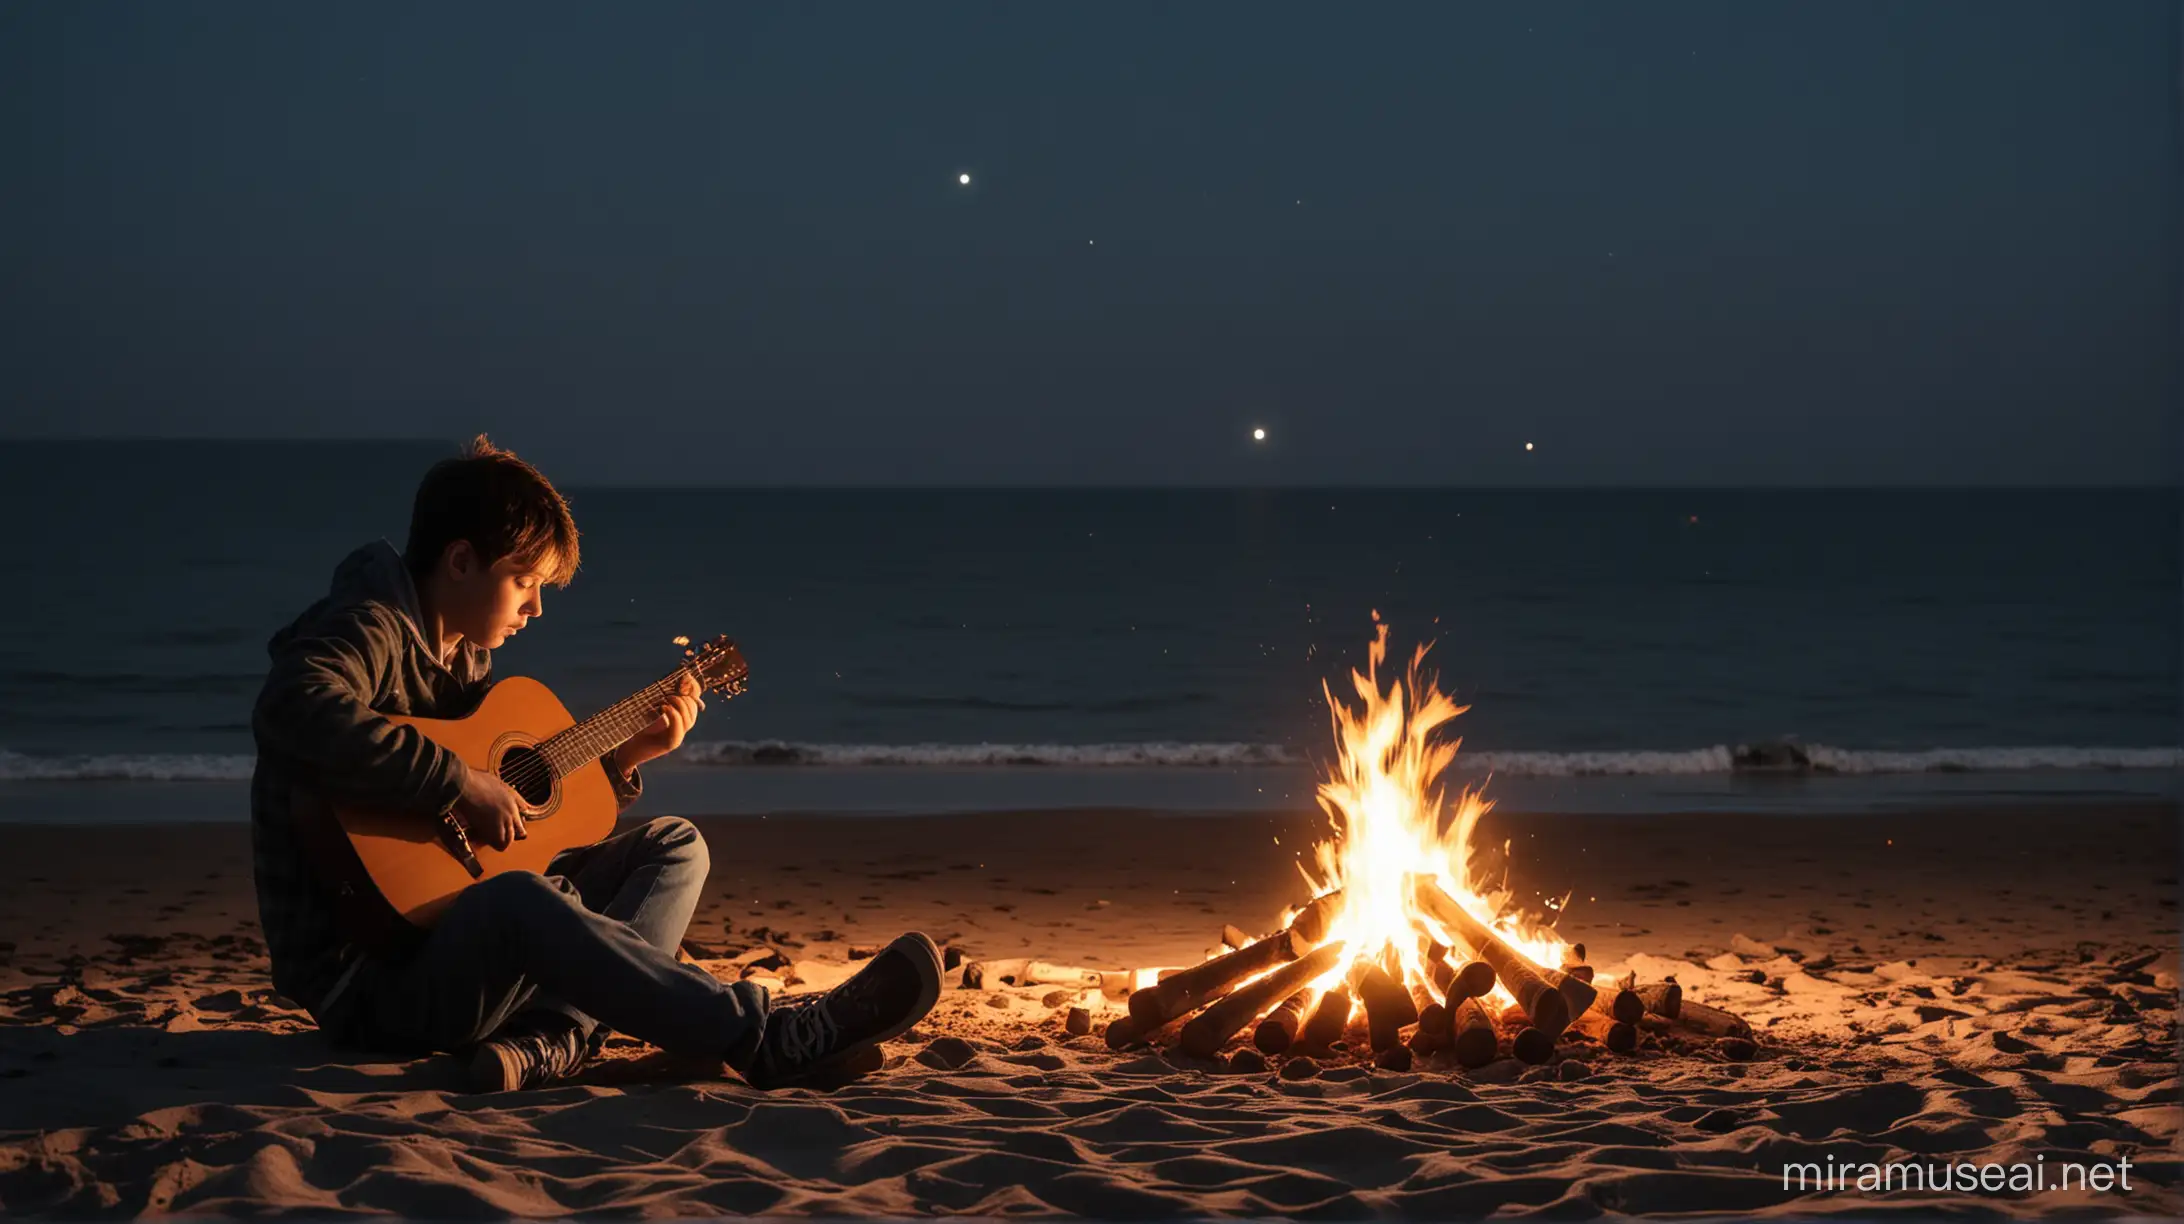 A sad boy  are sitting next to a bonfire on the seashore at night, the boy is playing guitar

